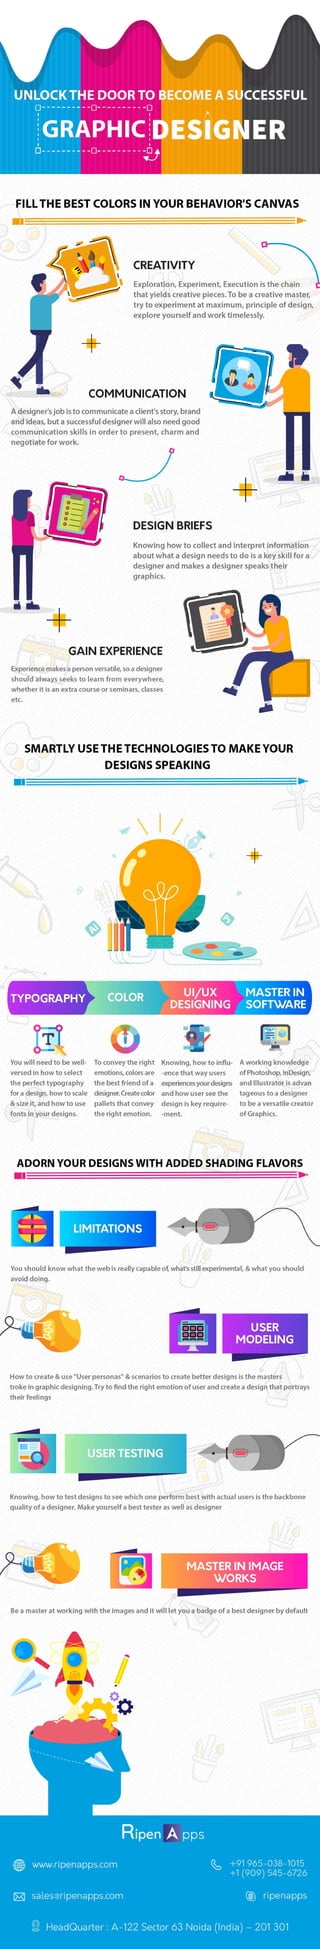 Keys to Unlock the door to Become a Successful Graphic Designer